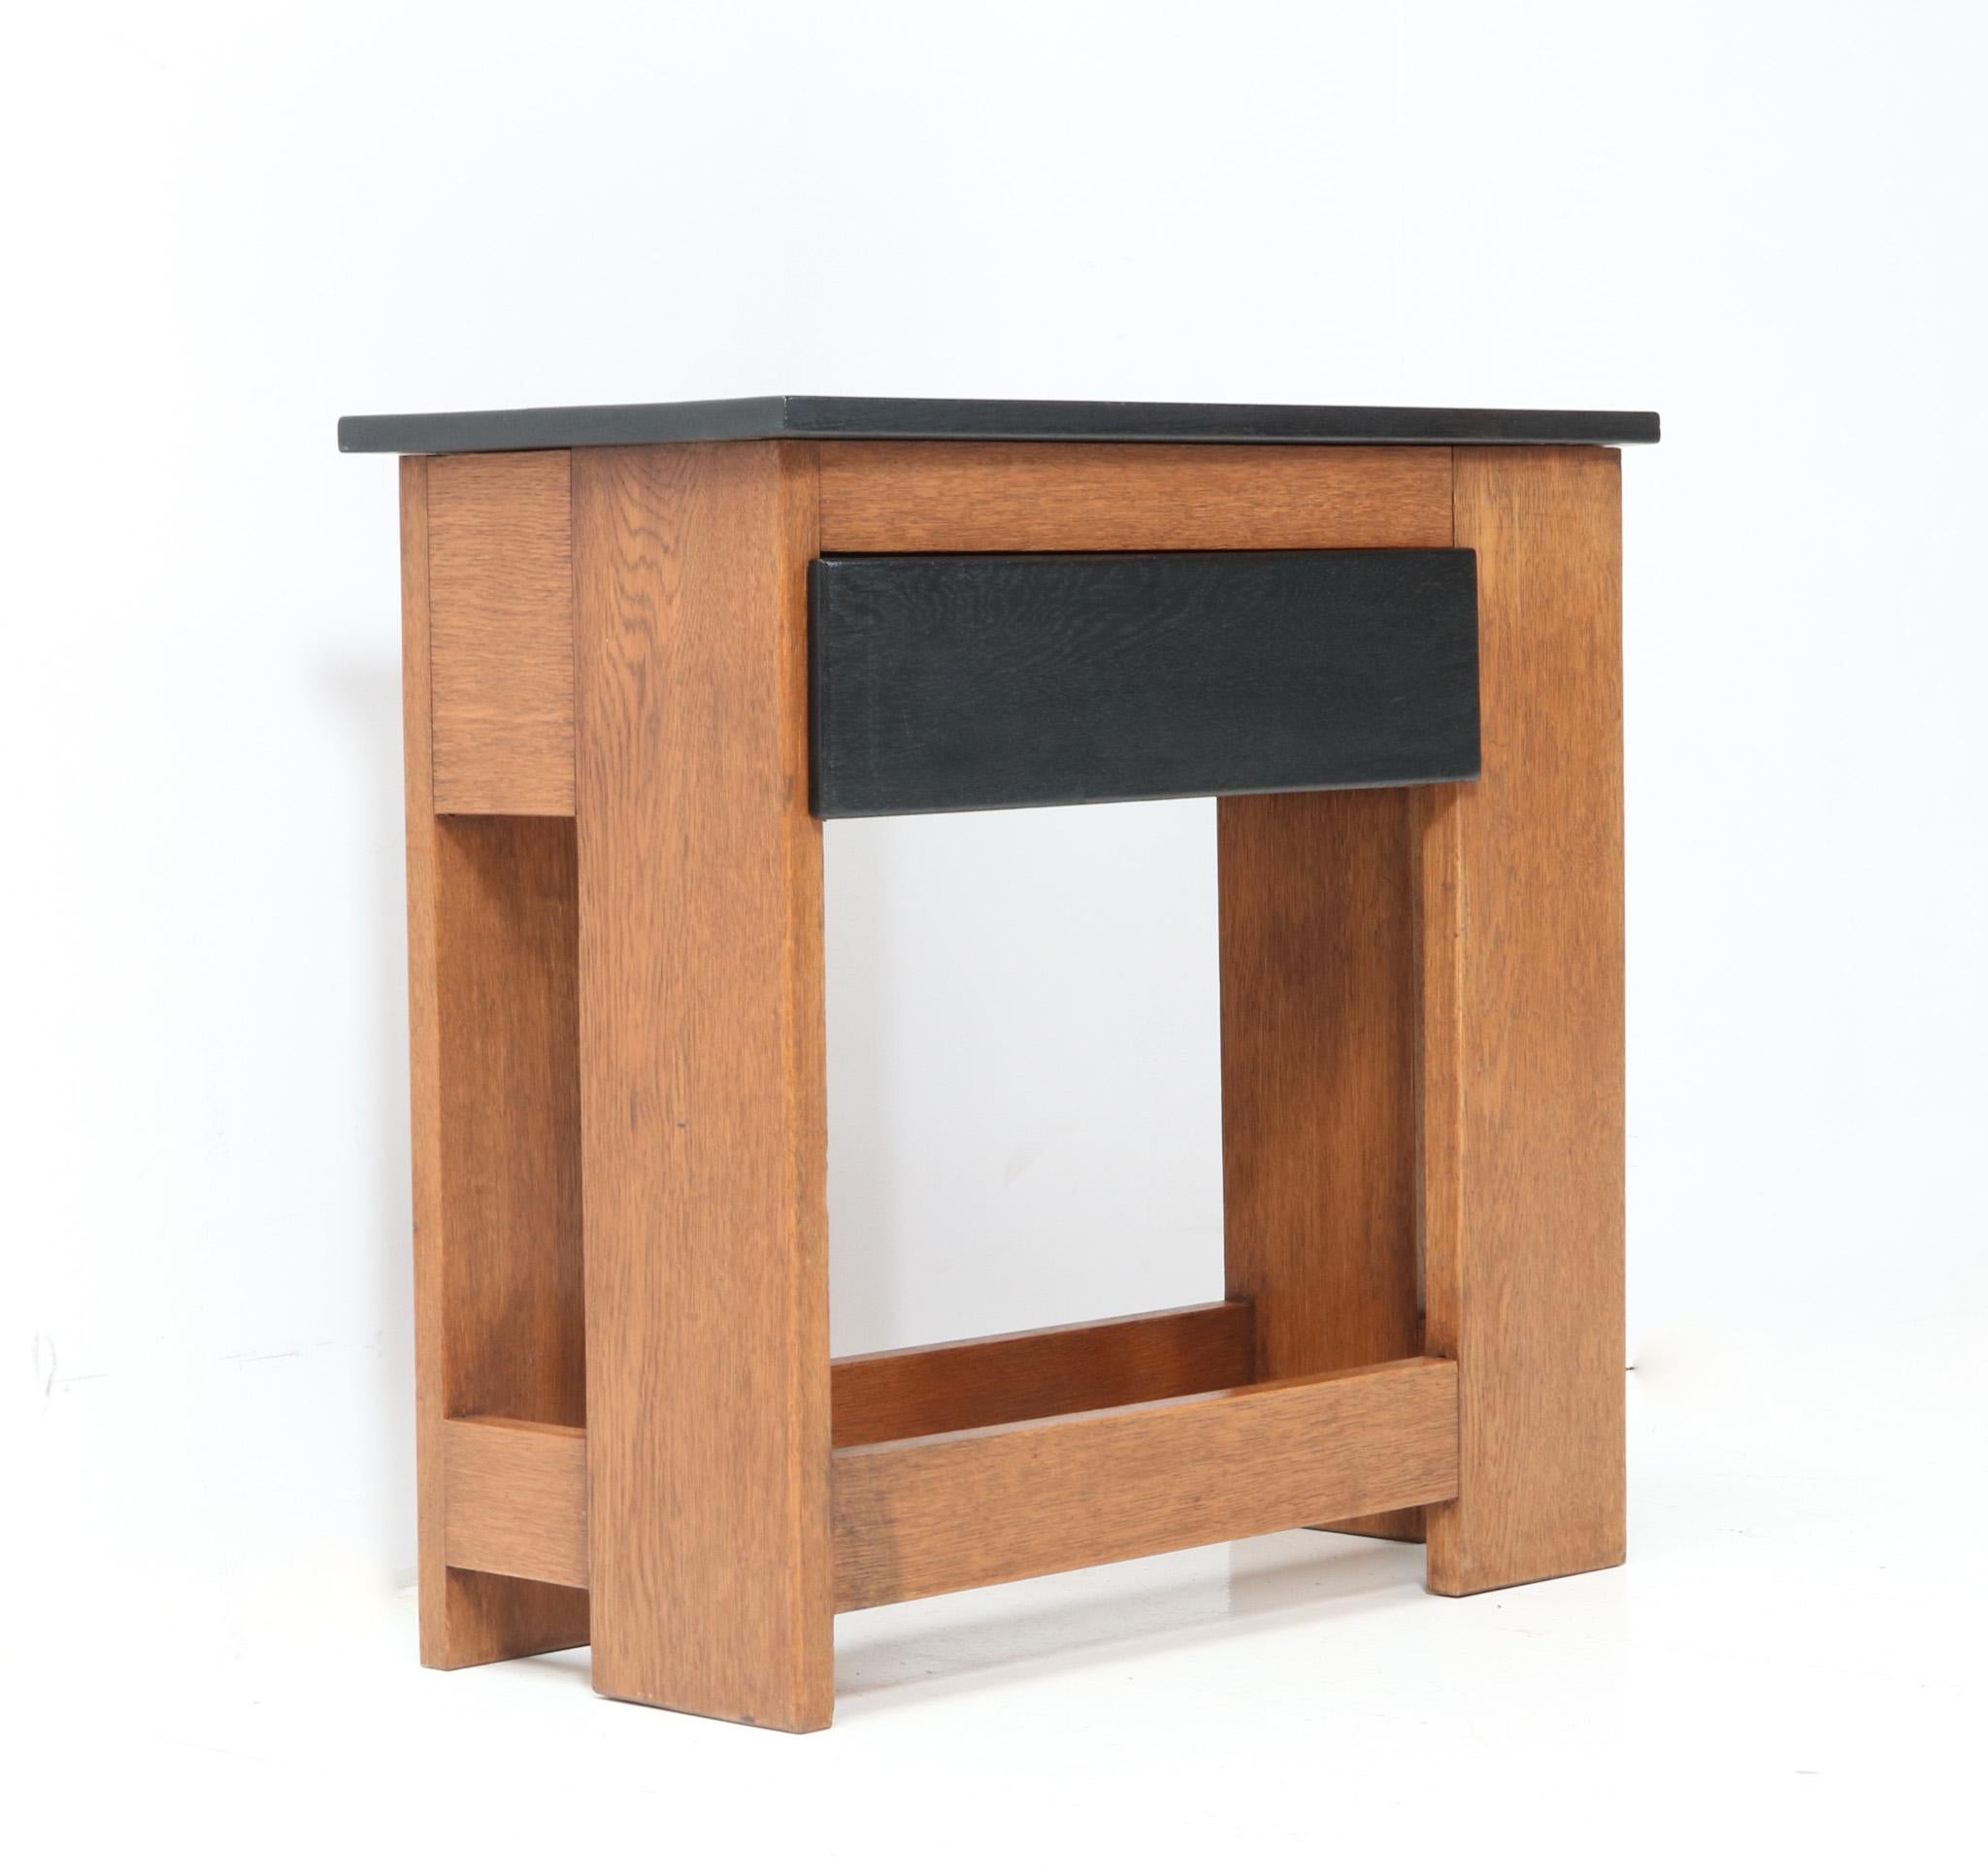 Dutch  Art Deco Modernist Oak Cabinet or Side Table by Cor Alons, 1920s For Sale